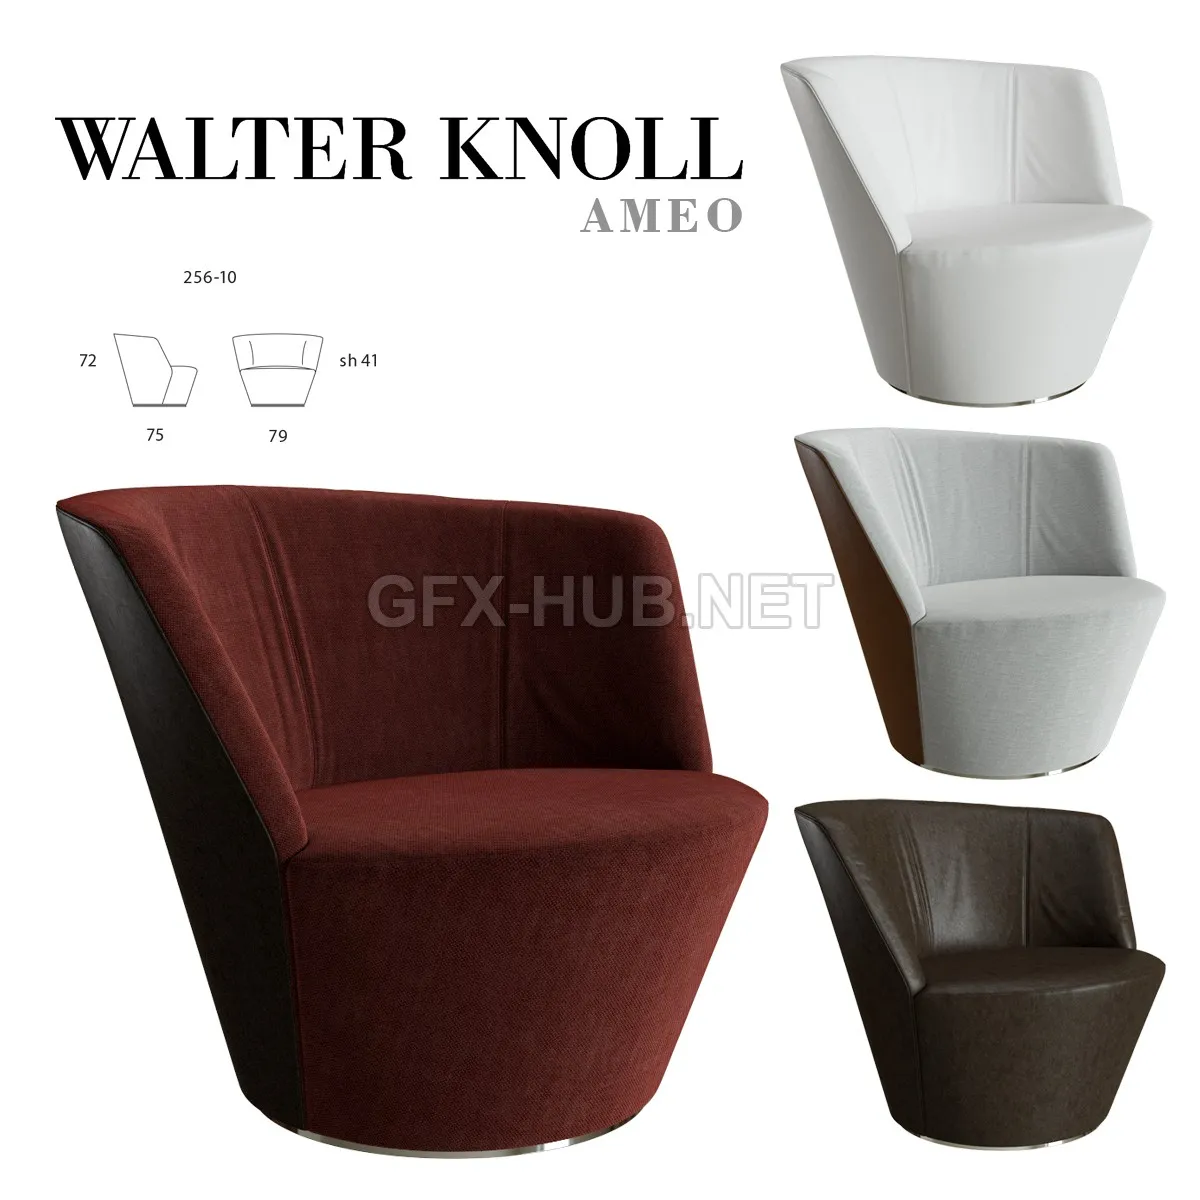 FURNITURE 3D MODELS – Armchair Walter Knoll Ameo